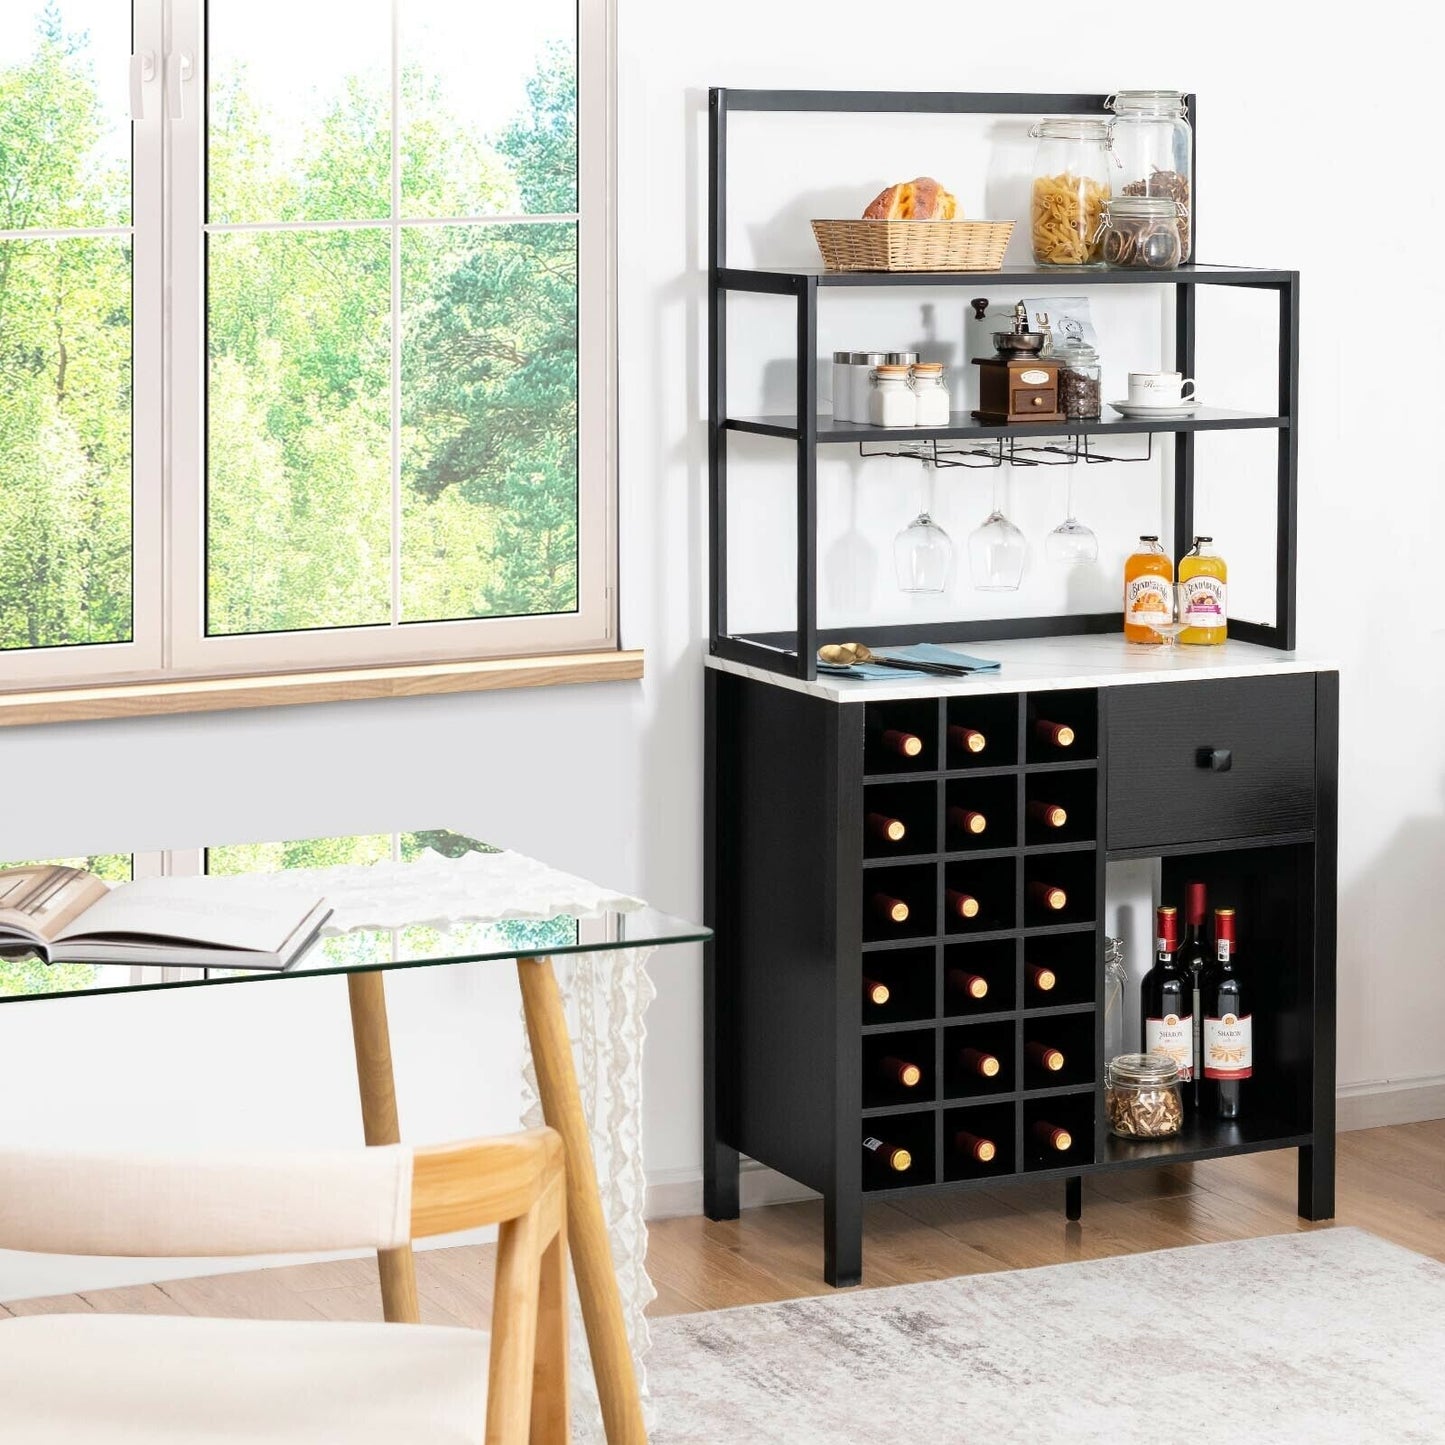 Kitchen Bakers Rack Freestanding Wine Rack Table with Glass Holder and Drawer-Black